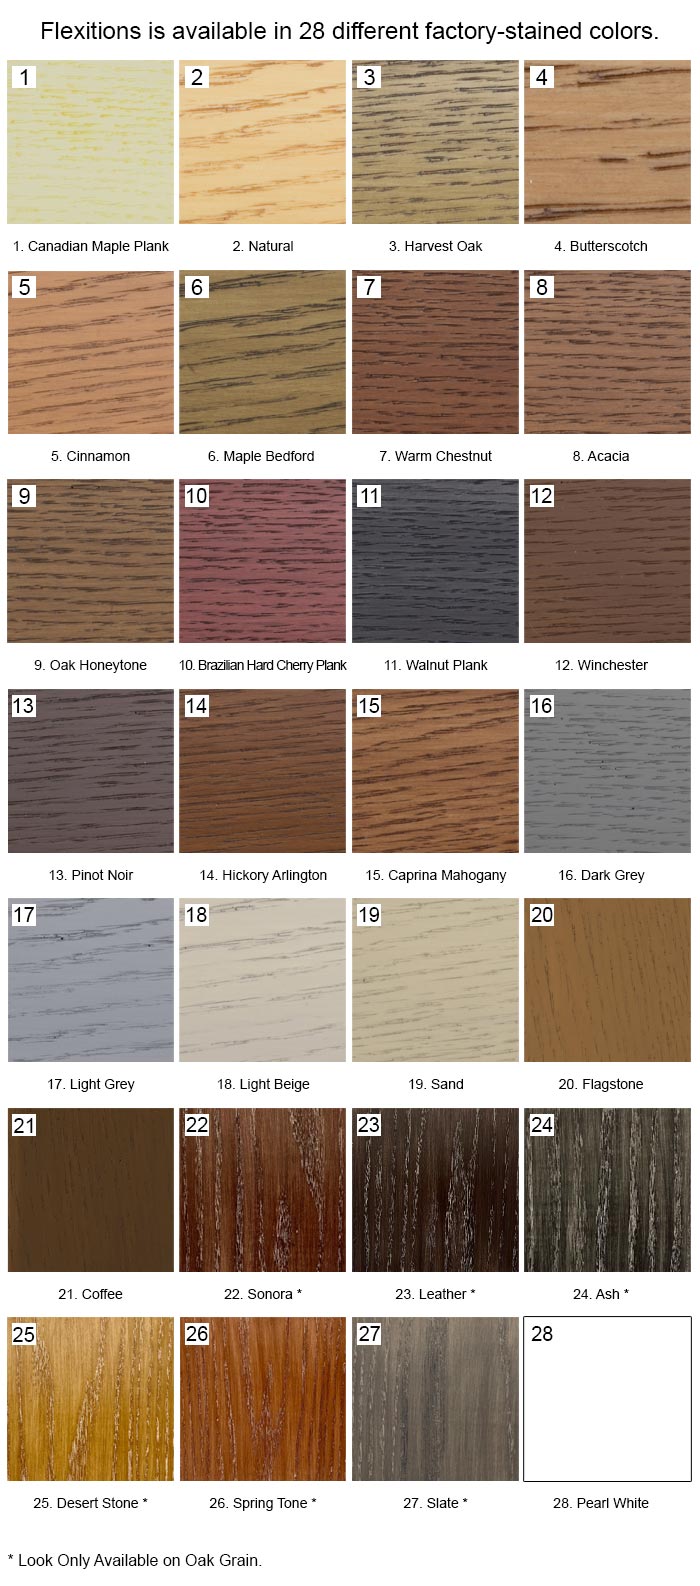 Color Chart for Stainable Flexible 3/4" Quarter Round Molding